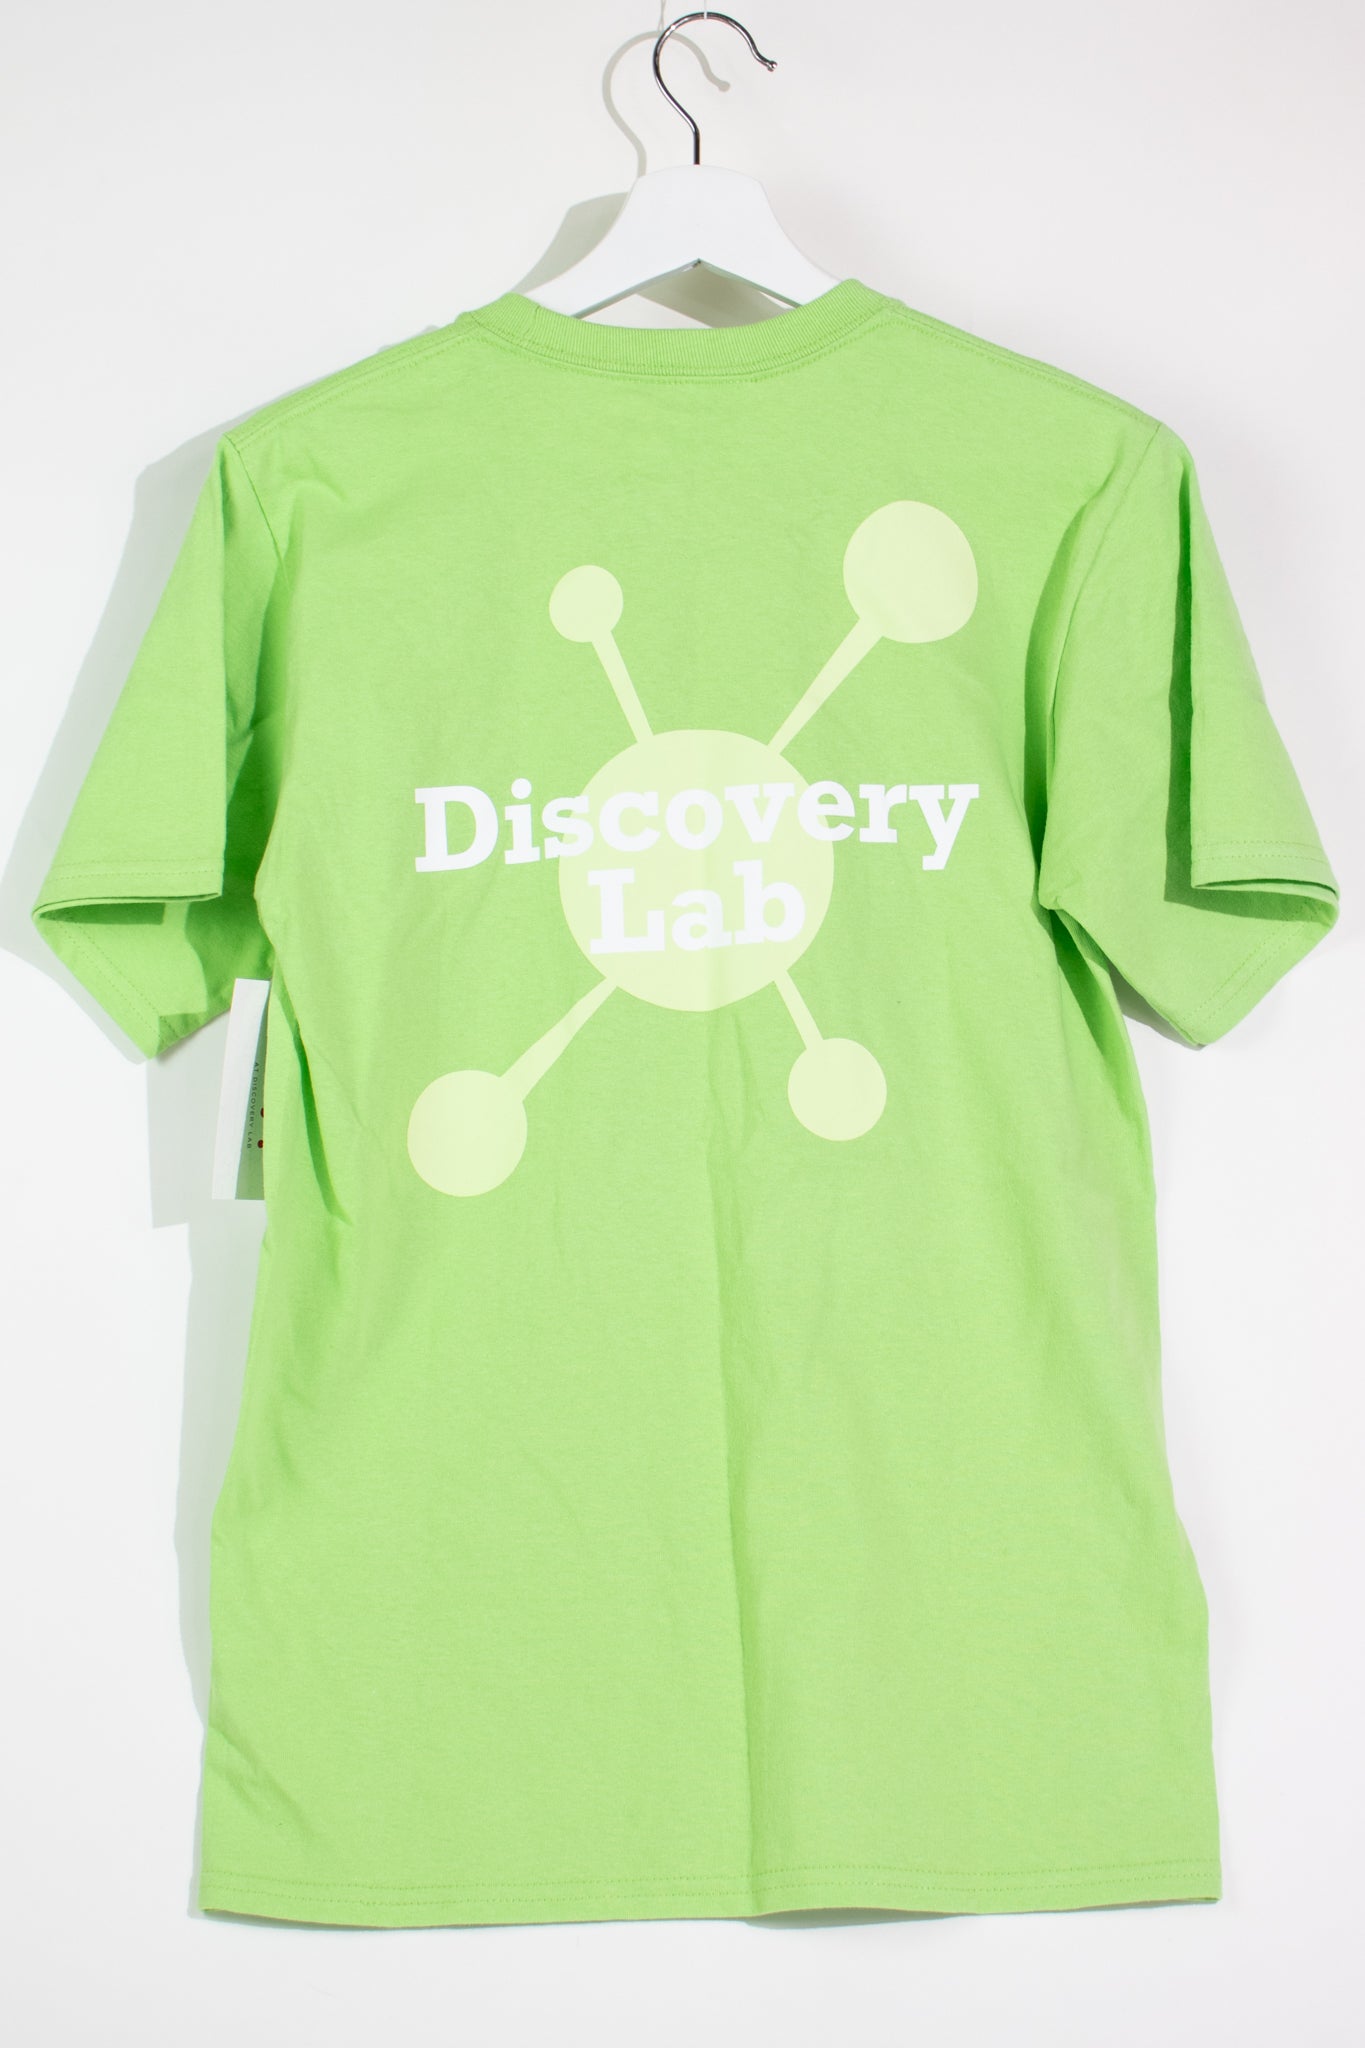 Discovery Lab Tee - Lime - Stemcell Science Shop